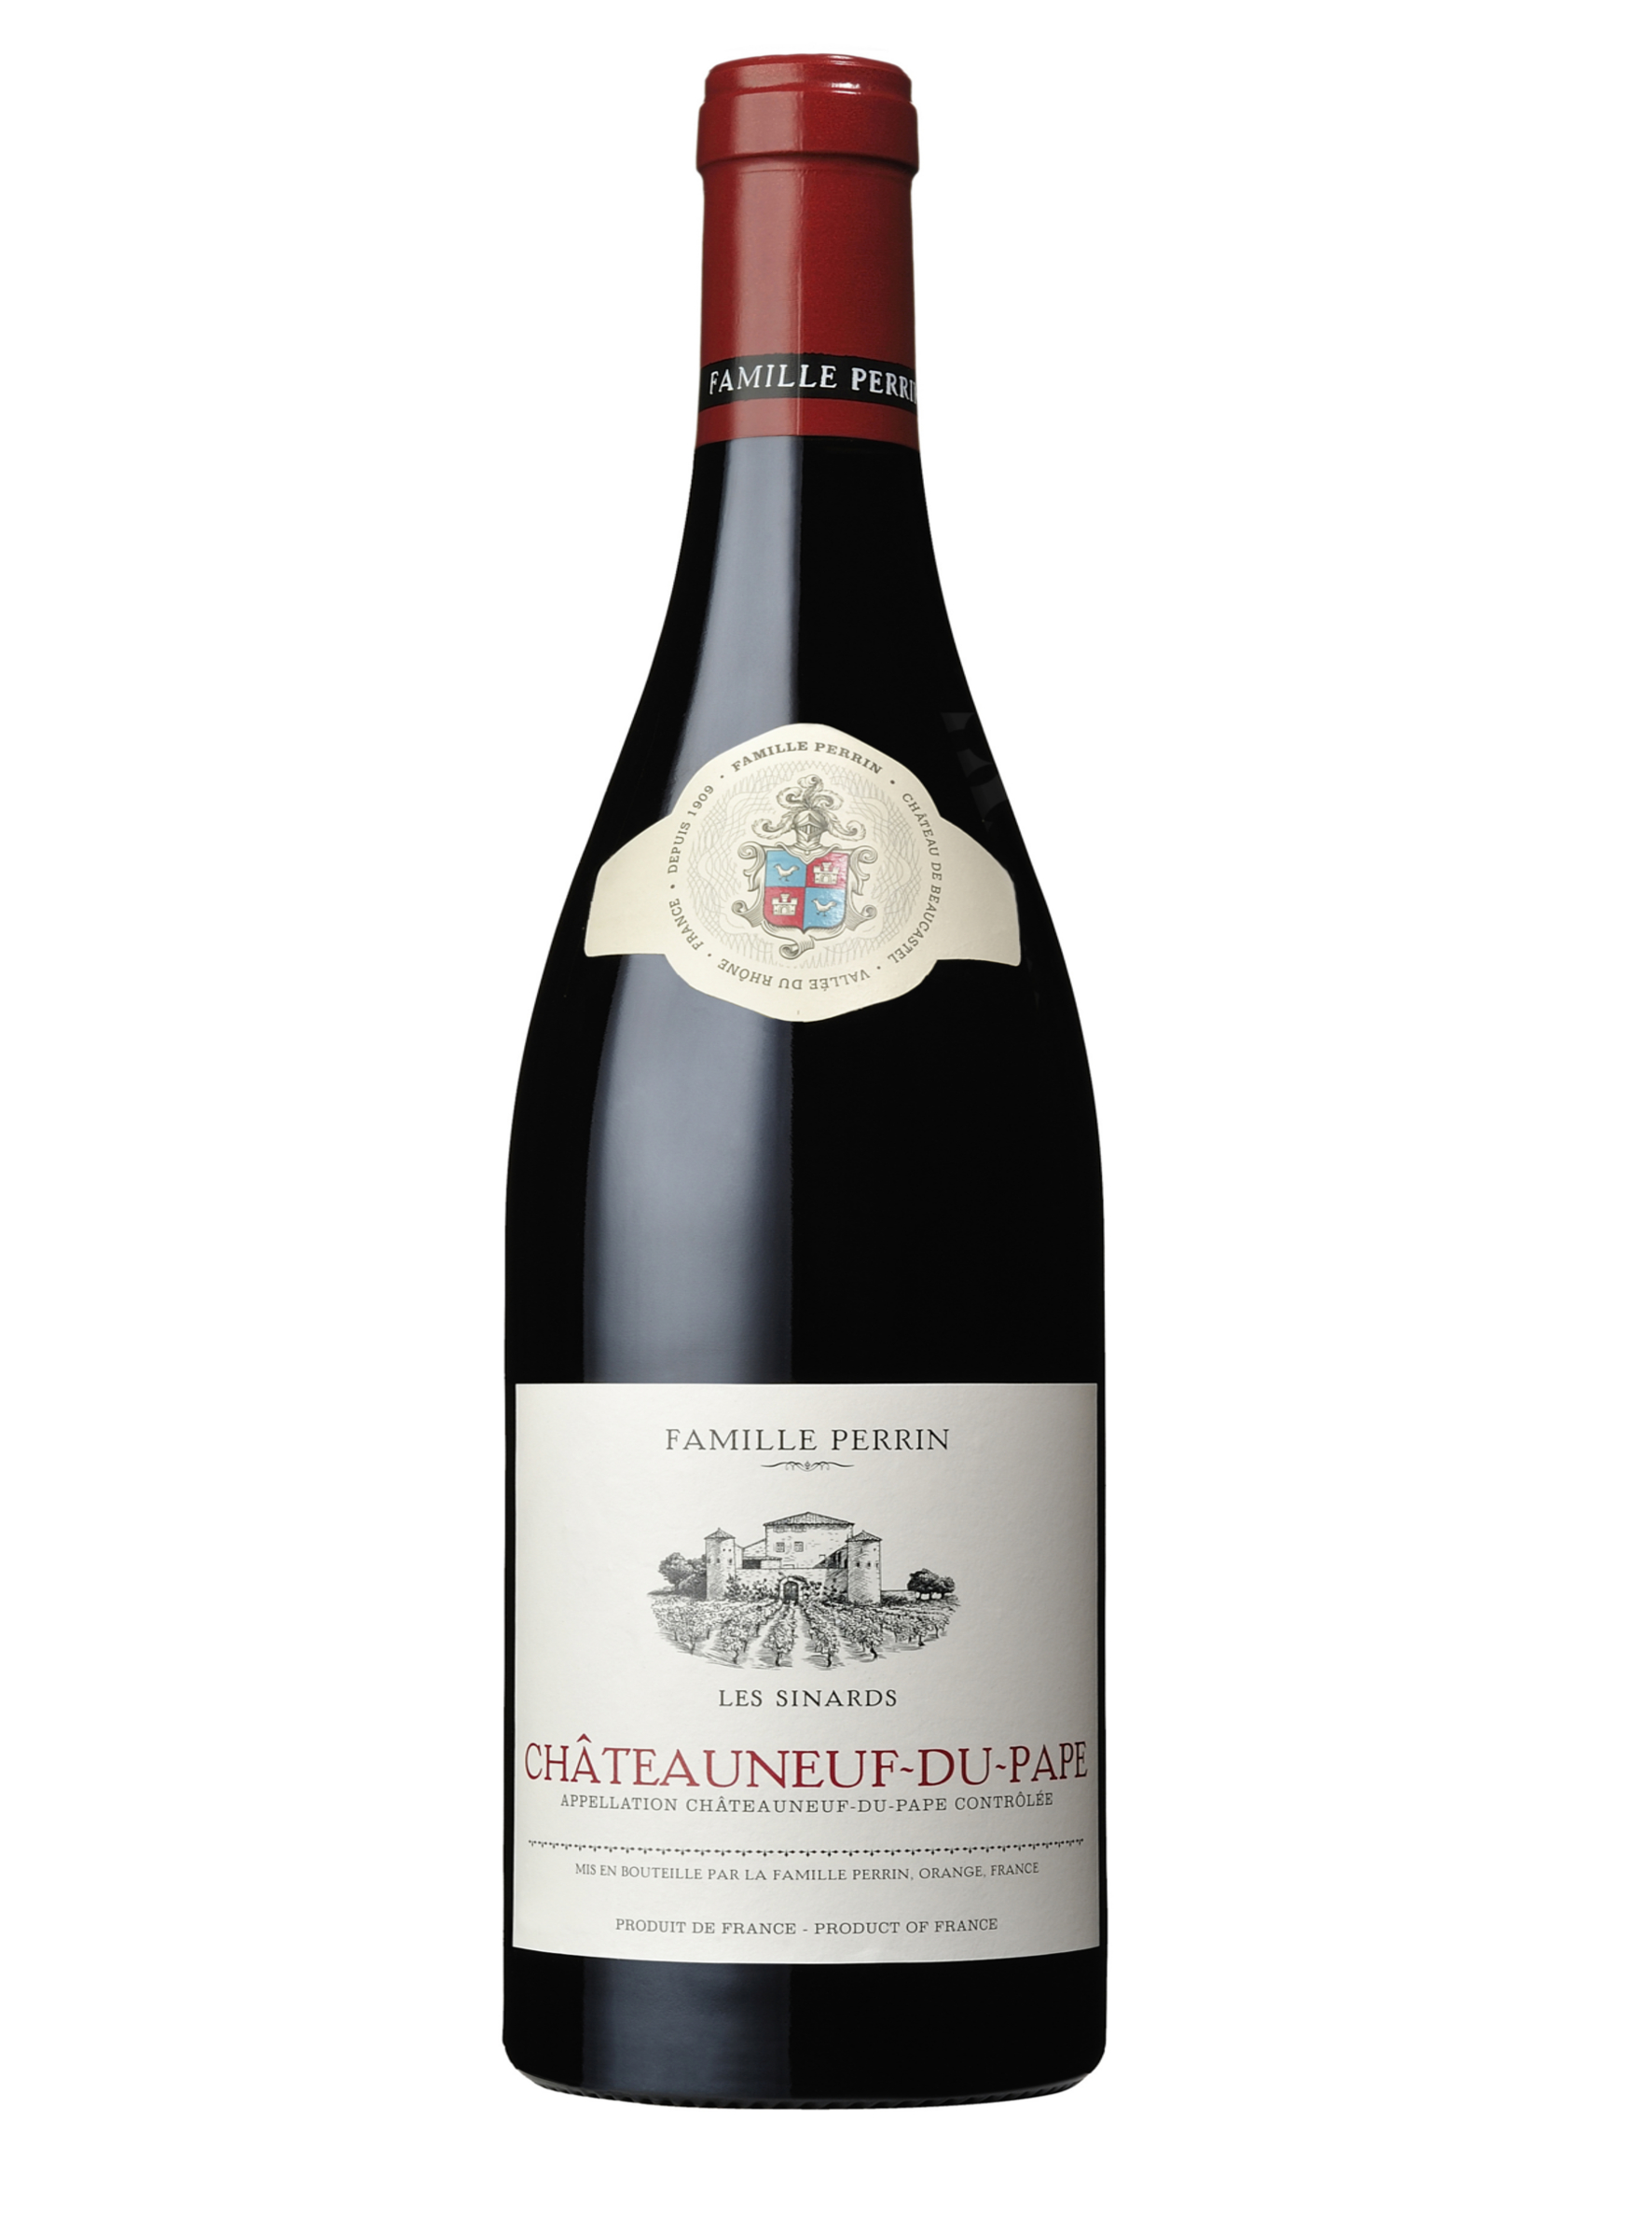 Perrin Chateauneuf-du-Pape "Les Sinards" rouge